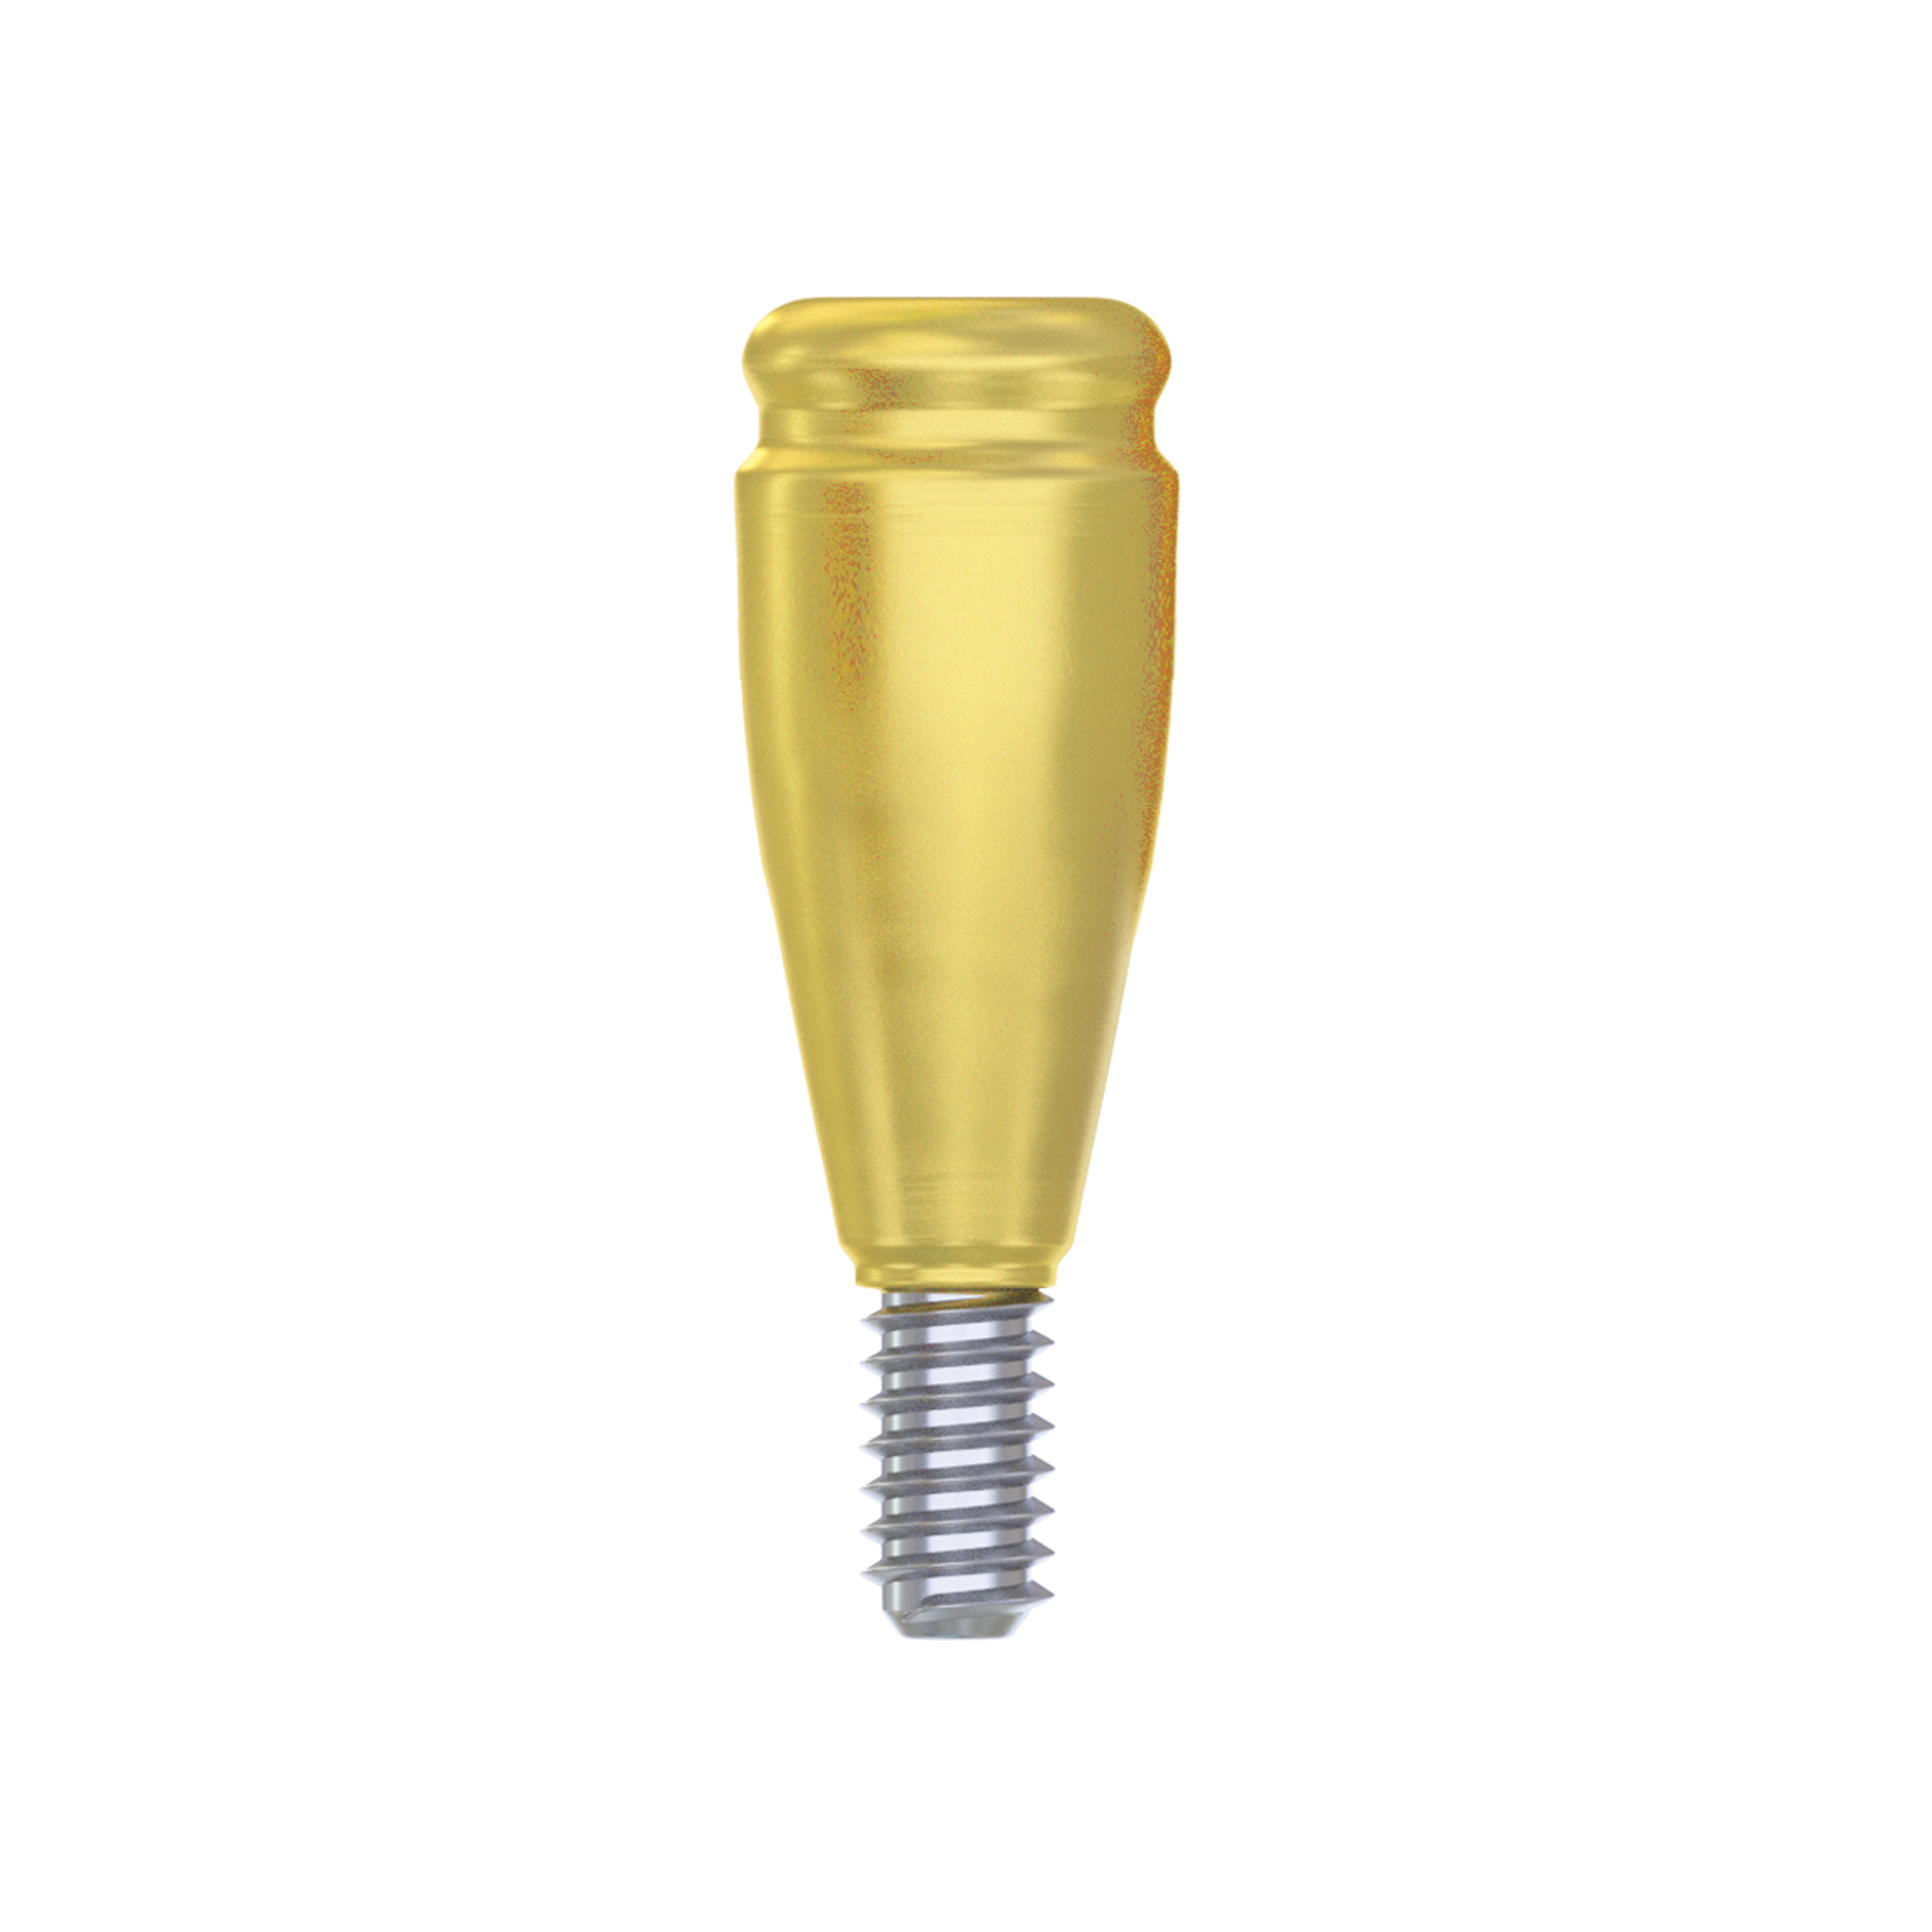 DSI Straight Loc-in Abutment 3.6mm - Conical Connection NP Ø3.5mm